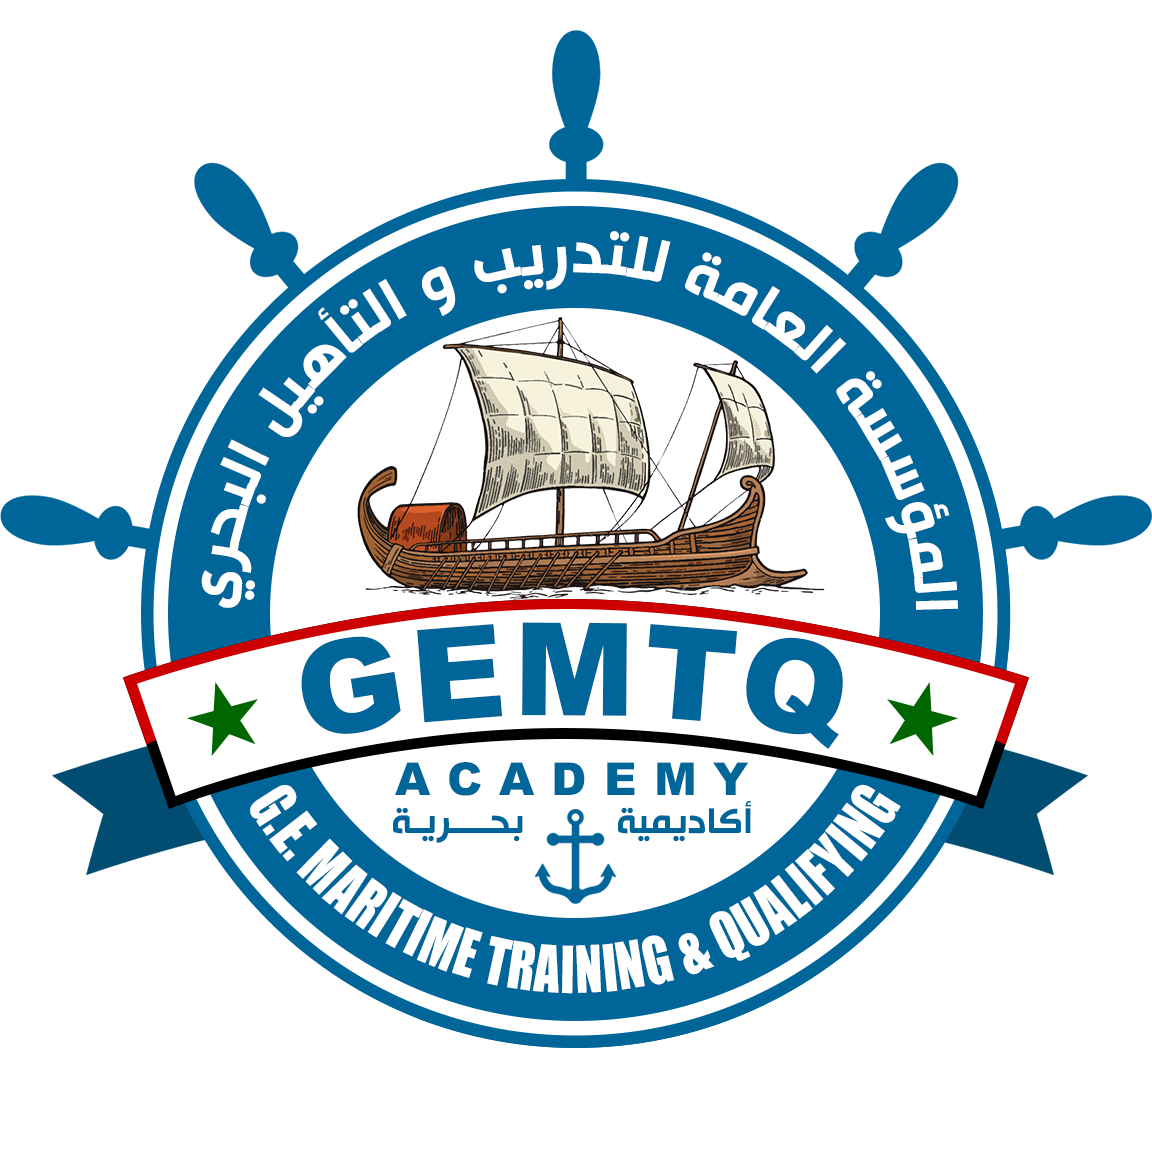 Fees for training, qualification and study courses at GEMTQ